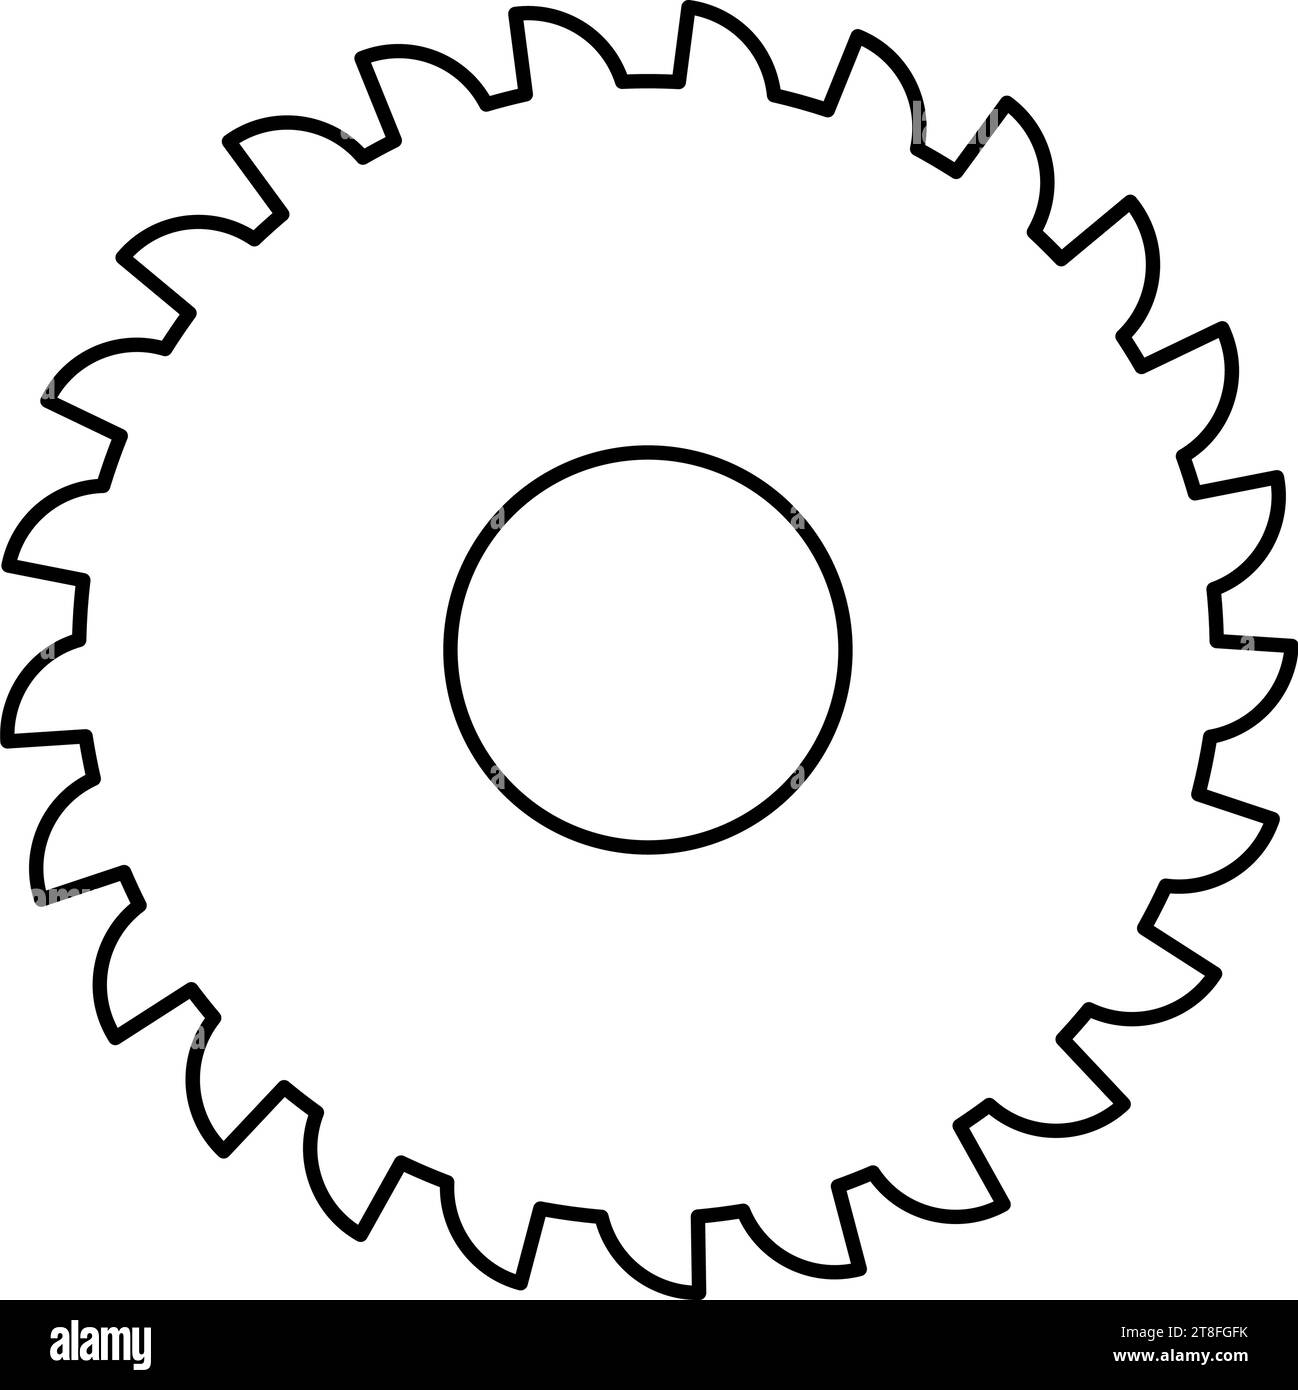 Round knife millstone circular saw disc contour outline line icon black color vector illustration image thin flat style simple Stock Vector